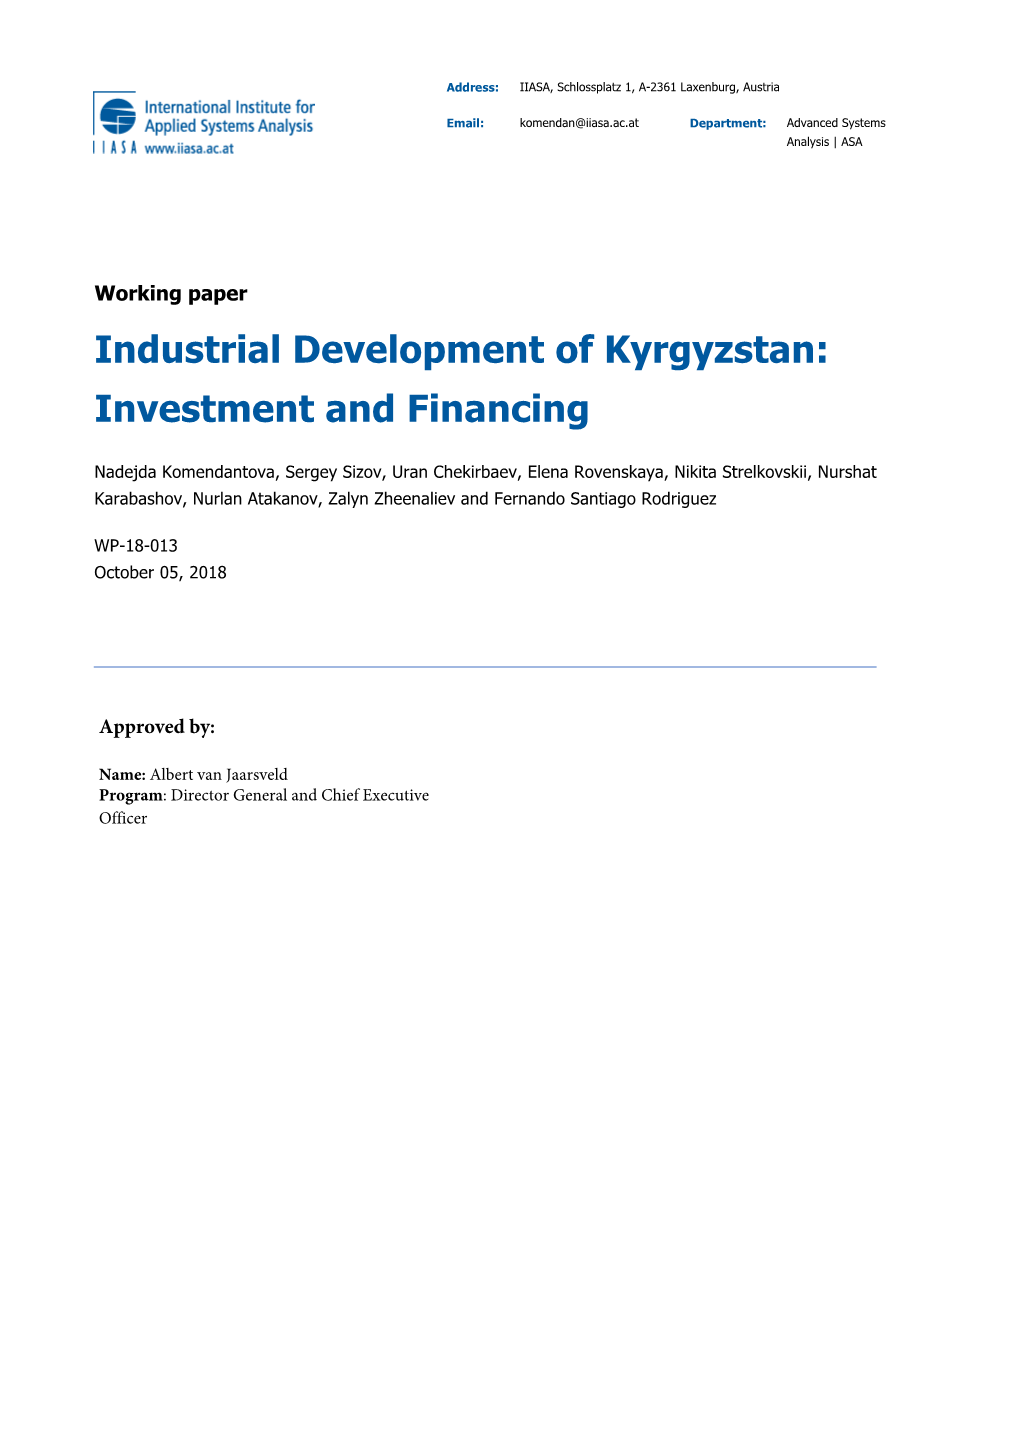 Industrial Development of Kyrgyzstan: Investment and Financing